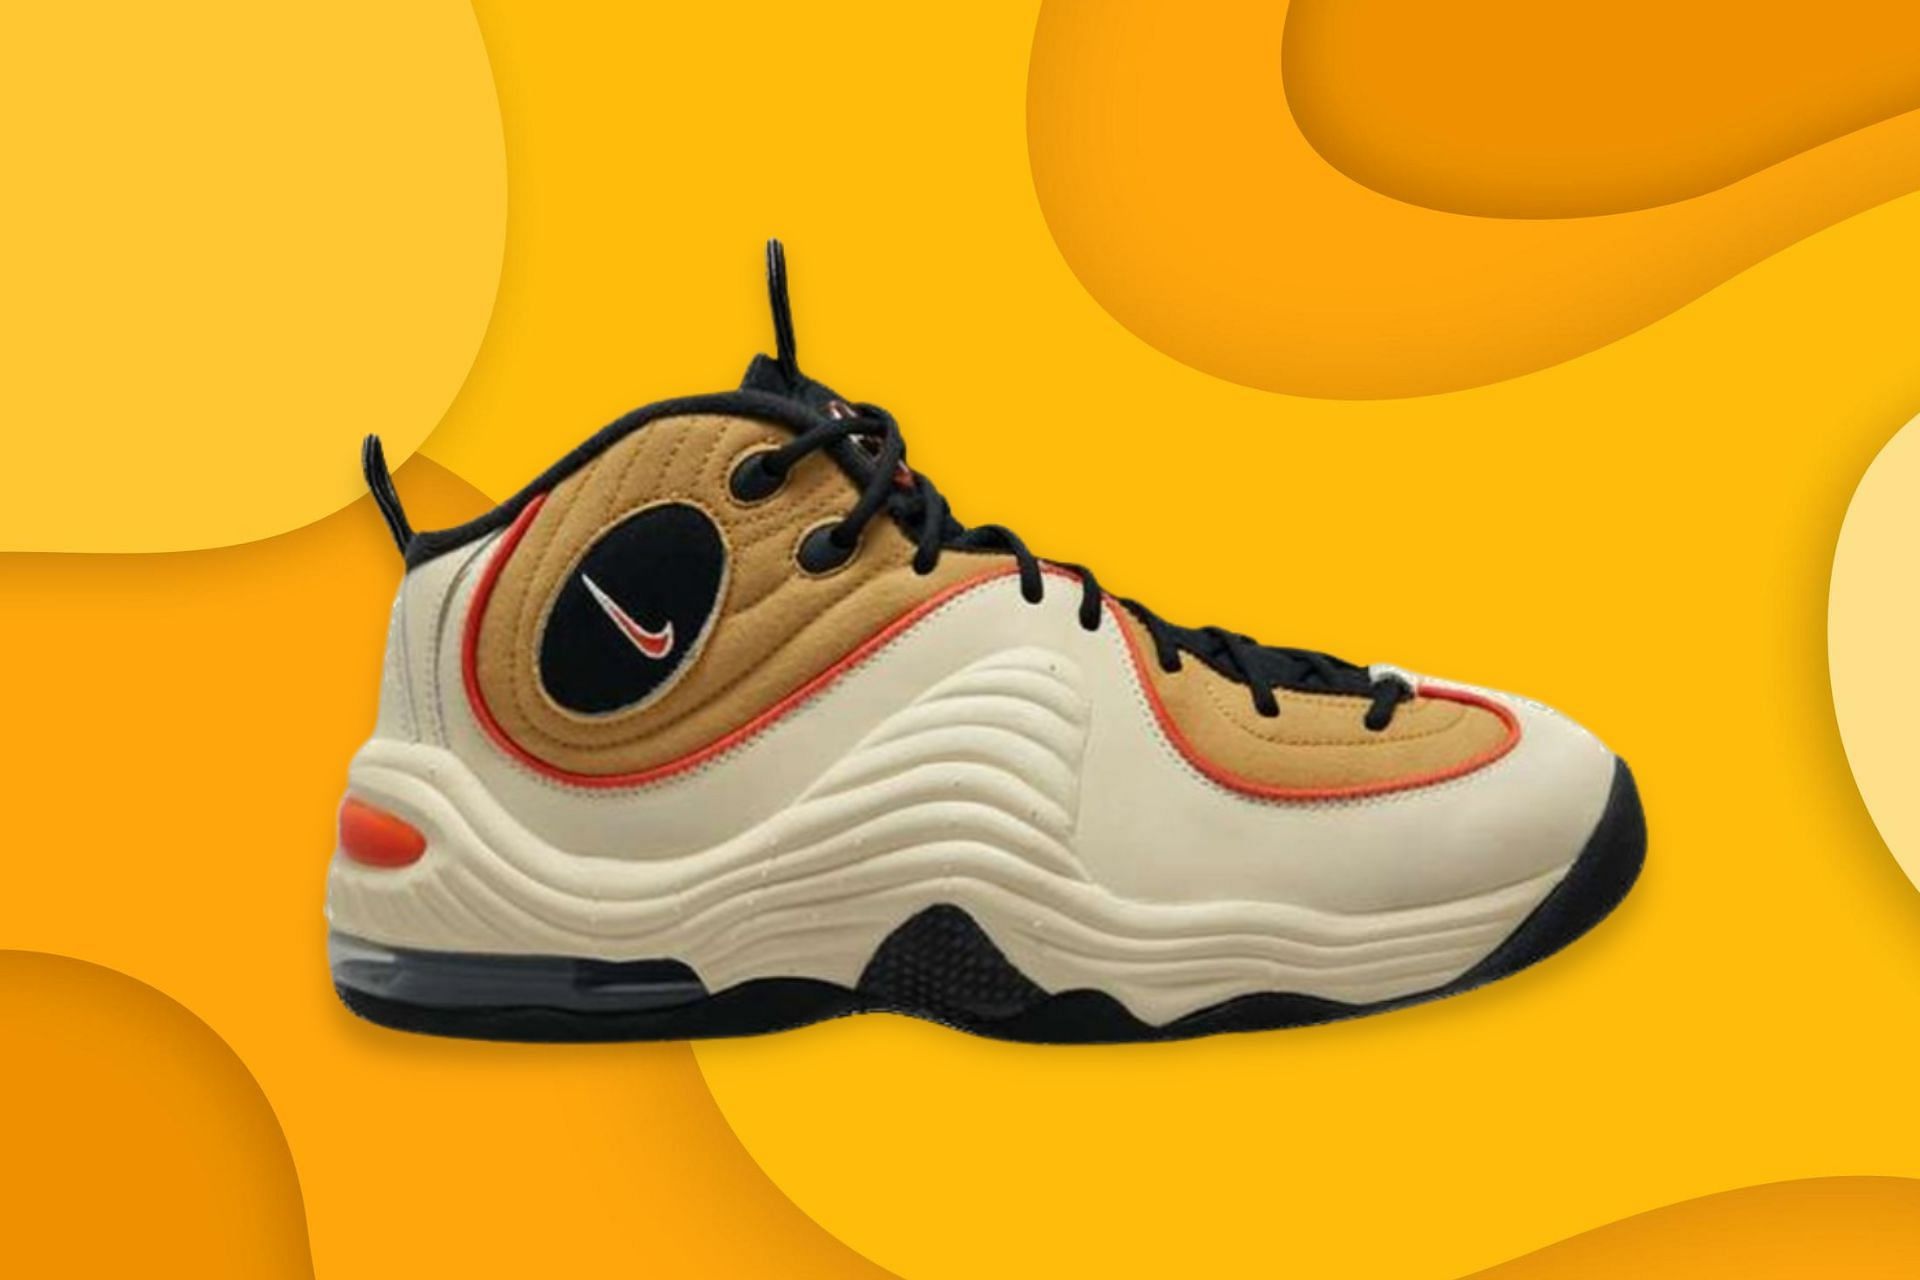 Penny Hardaway: Hardaway's Nike Air Penny “Wheat Gold” shoes: Where to buy, price, and more details